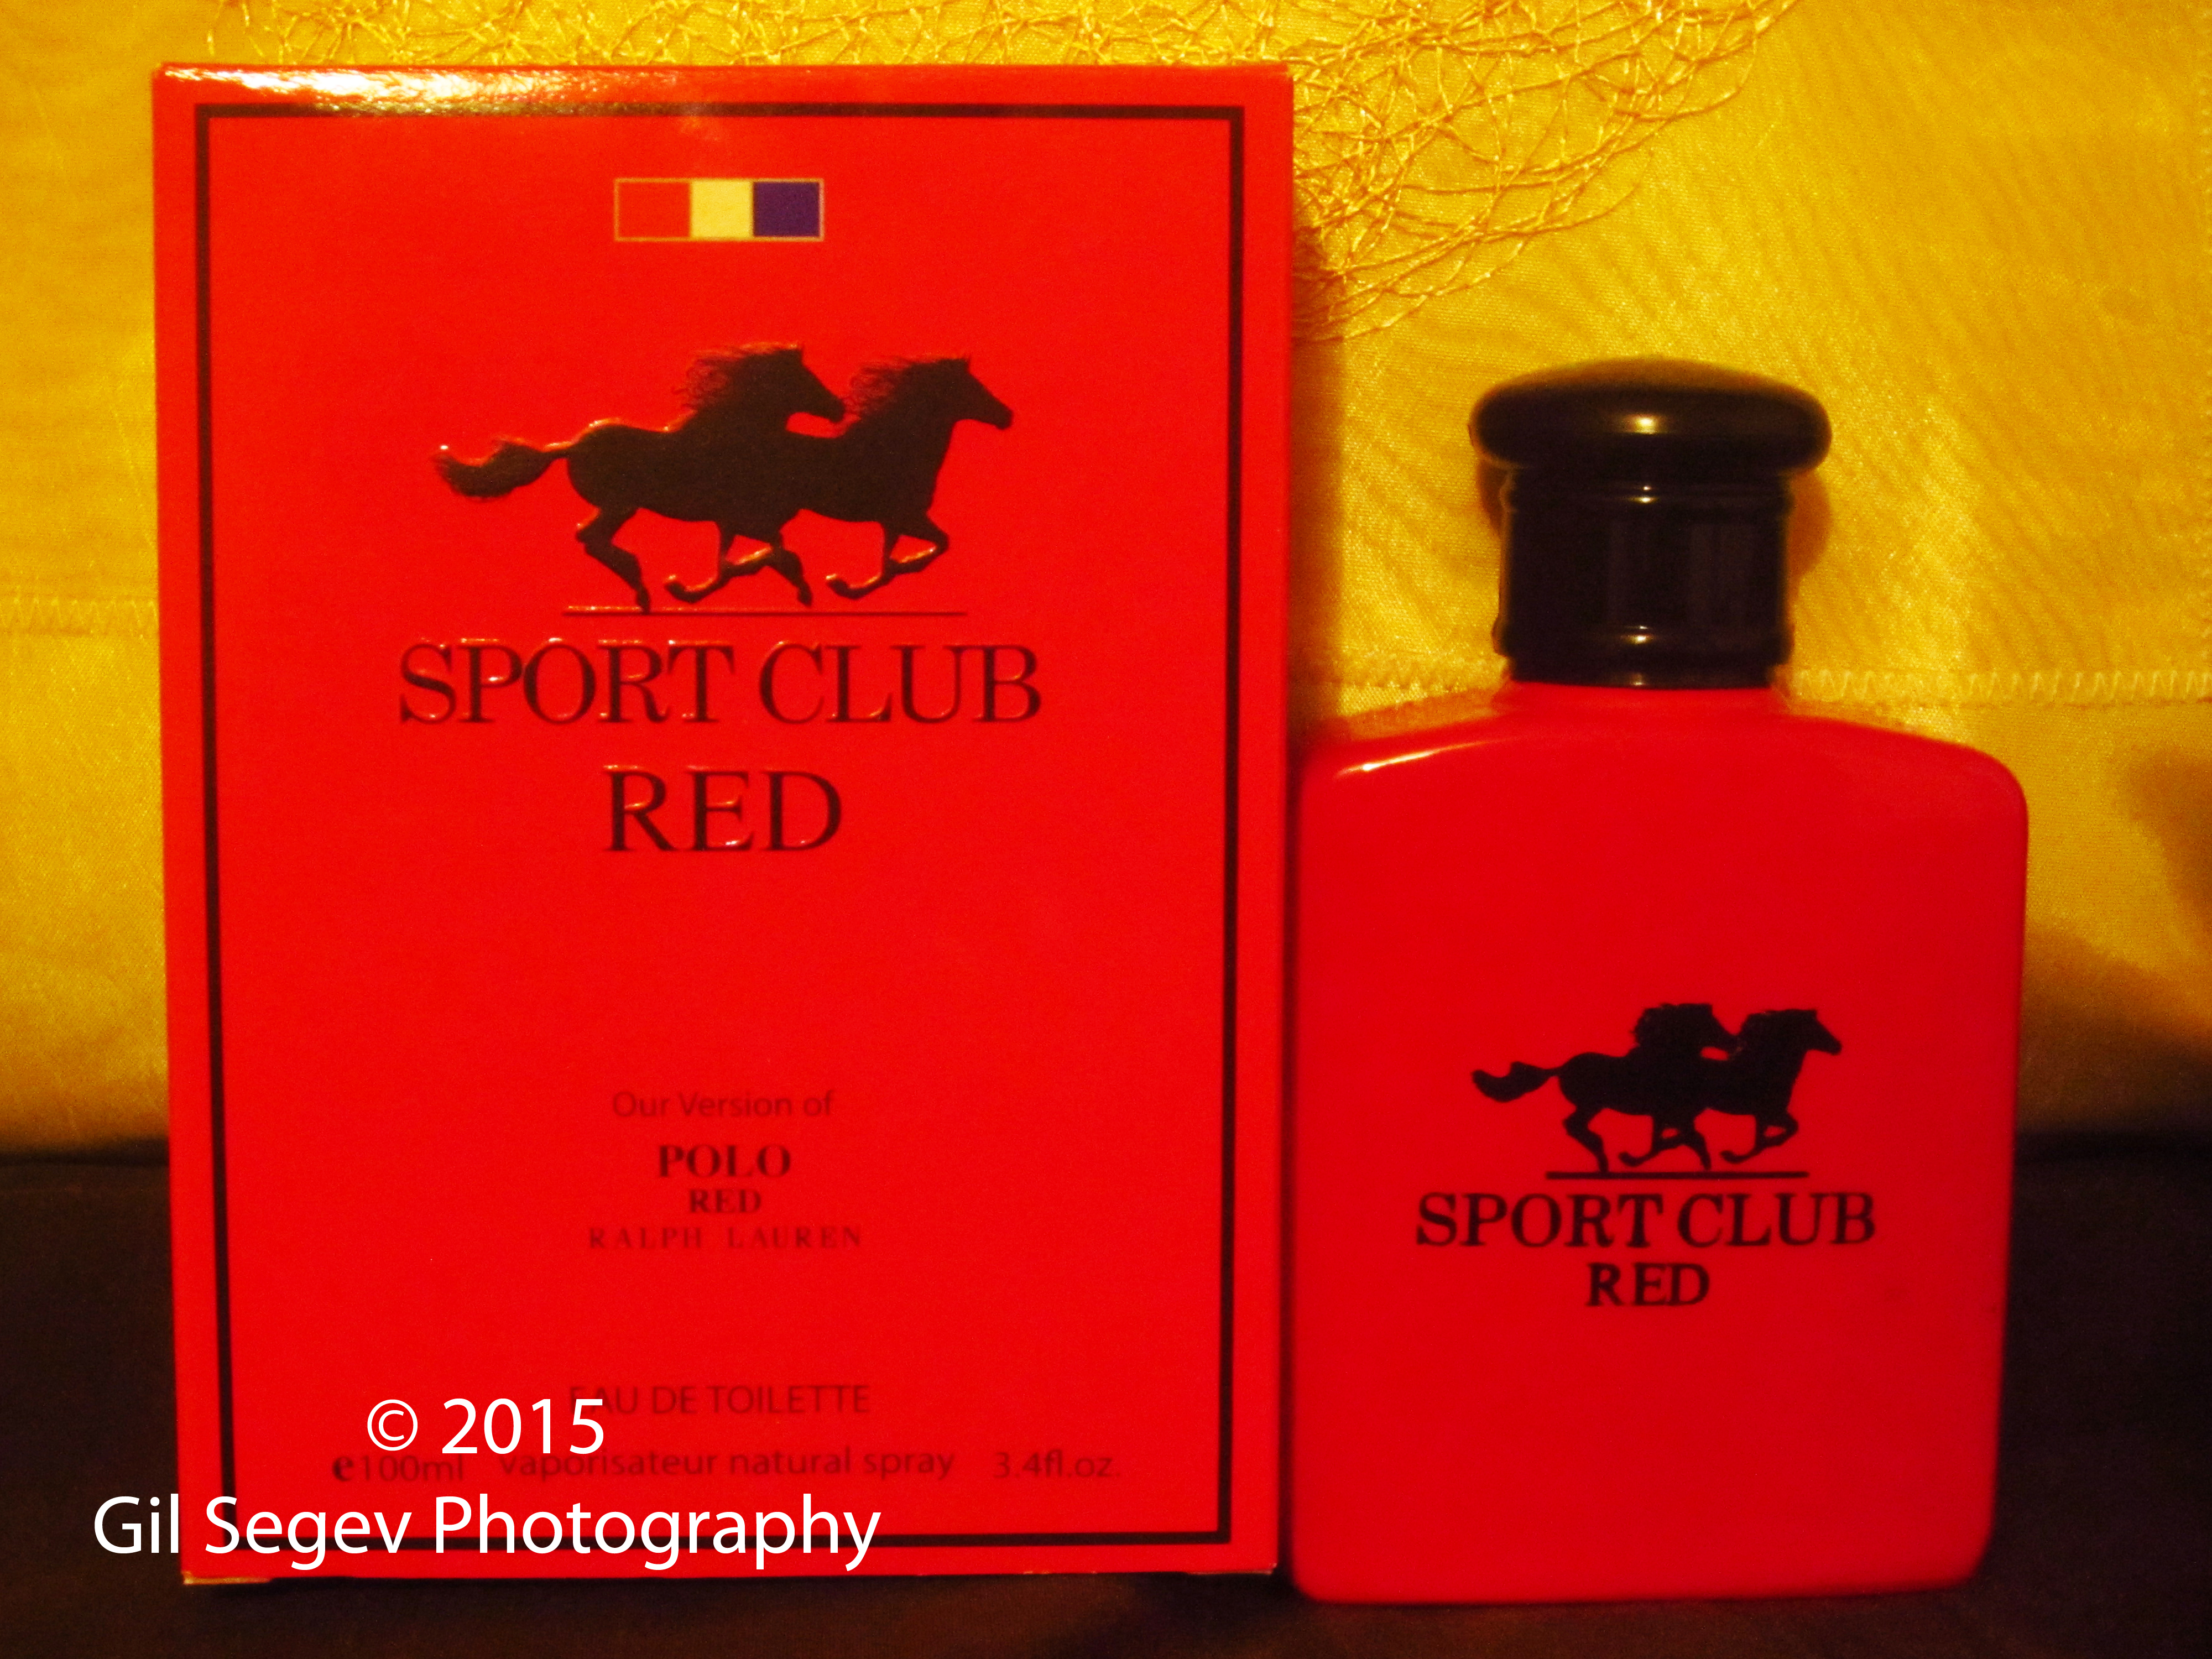 Buy fake polo red - 62% OFF! Share discount